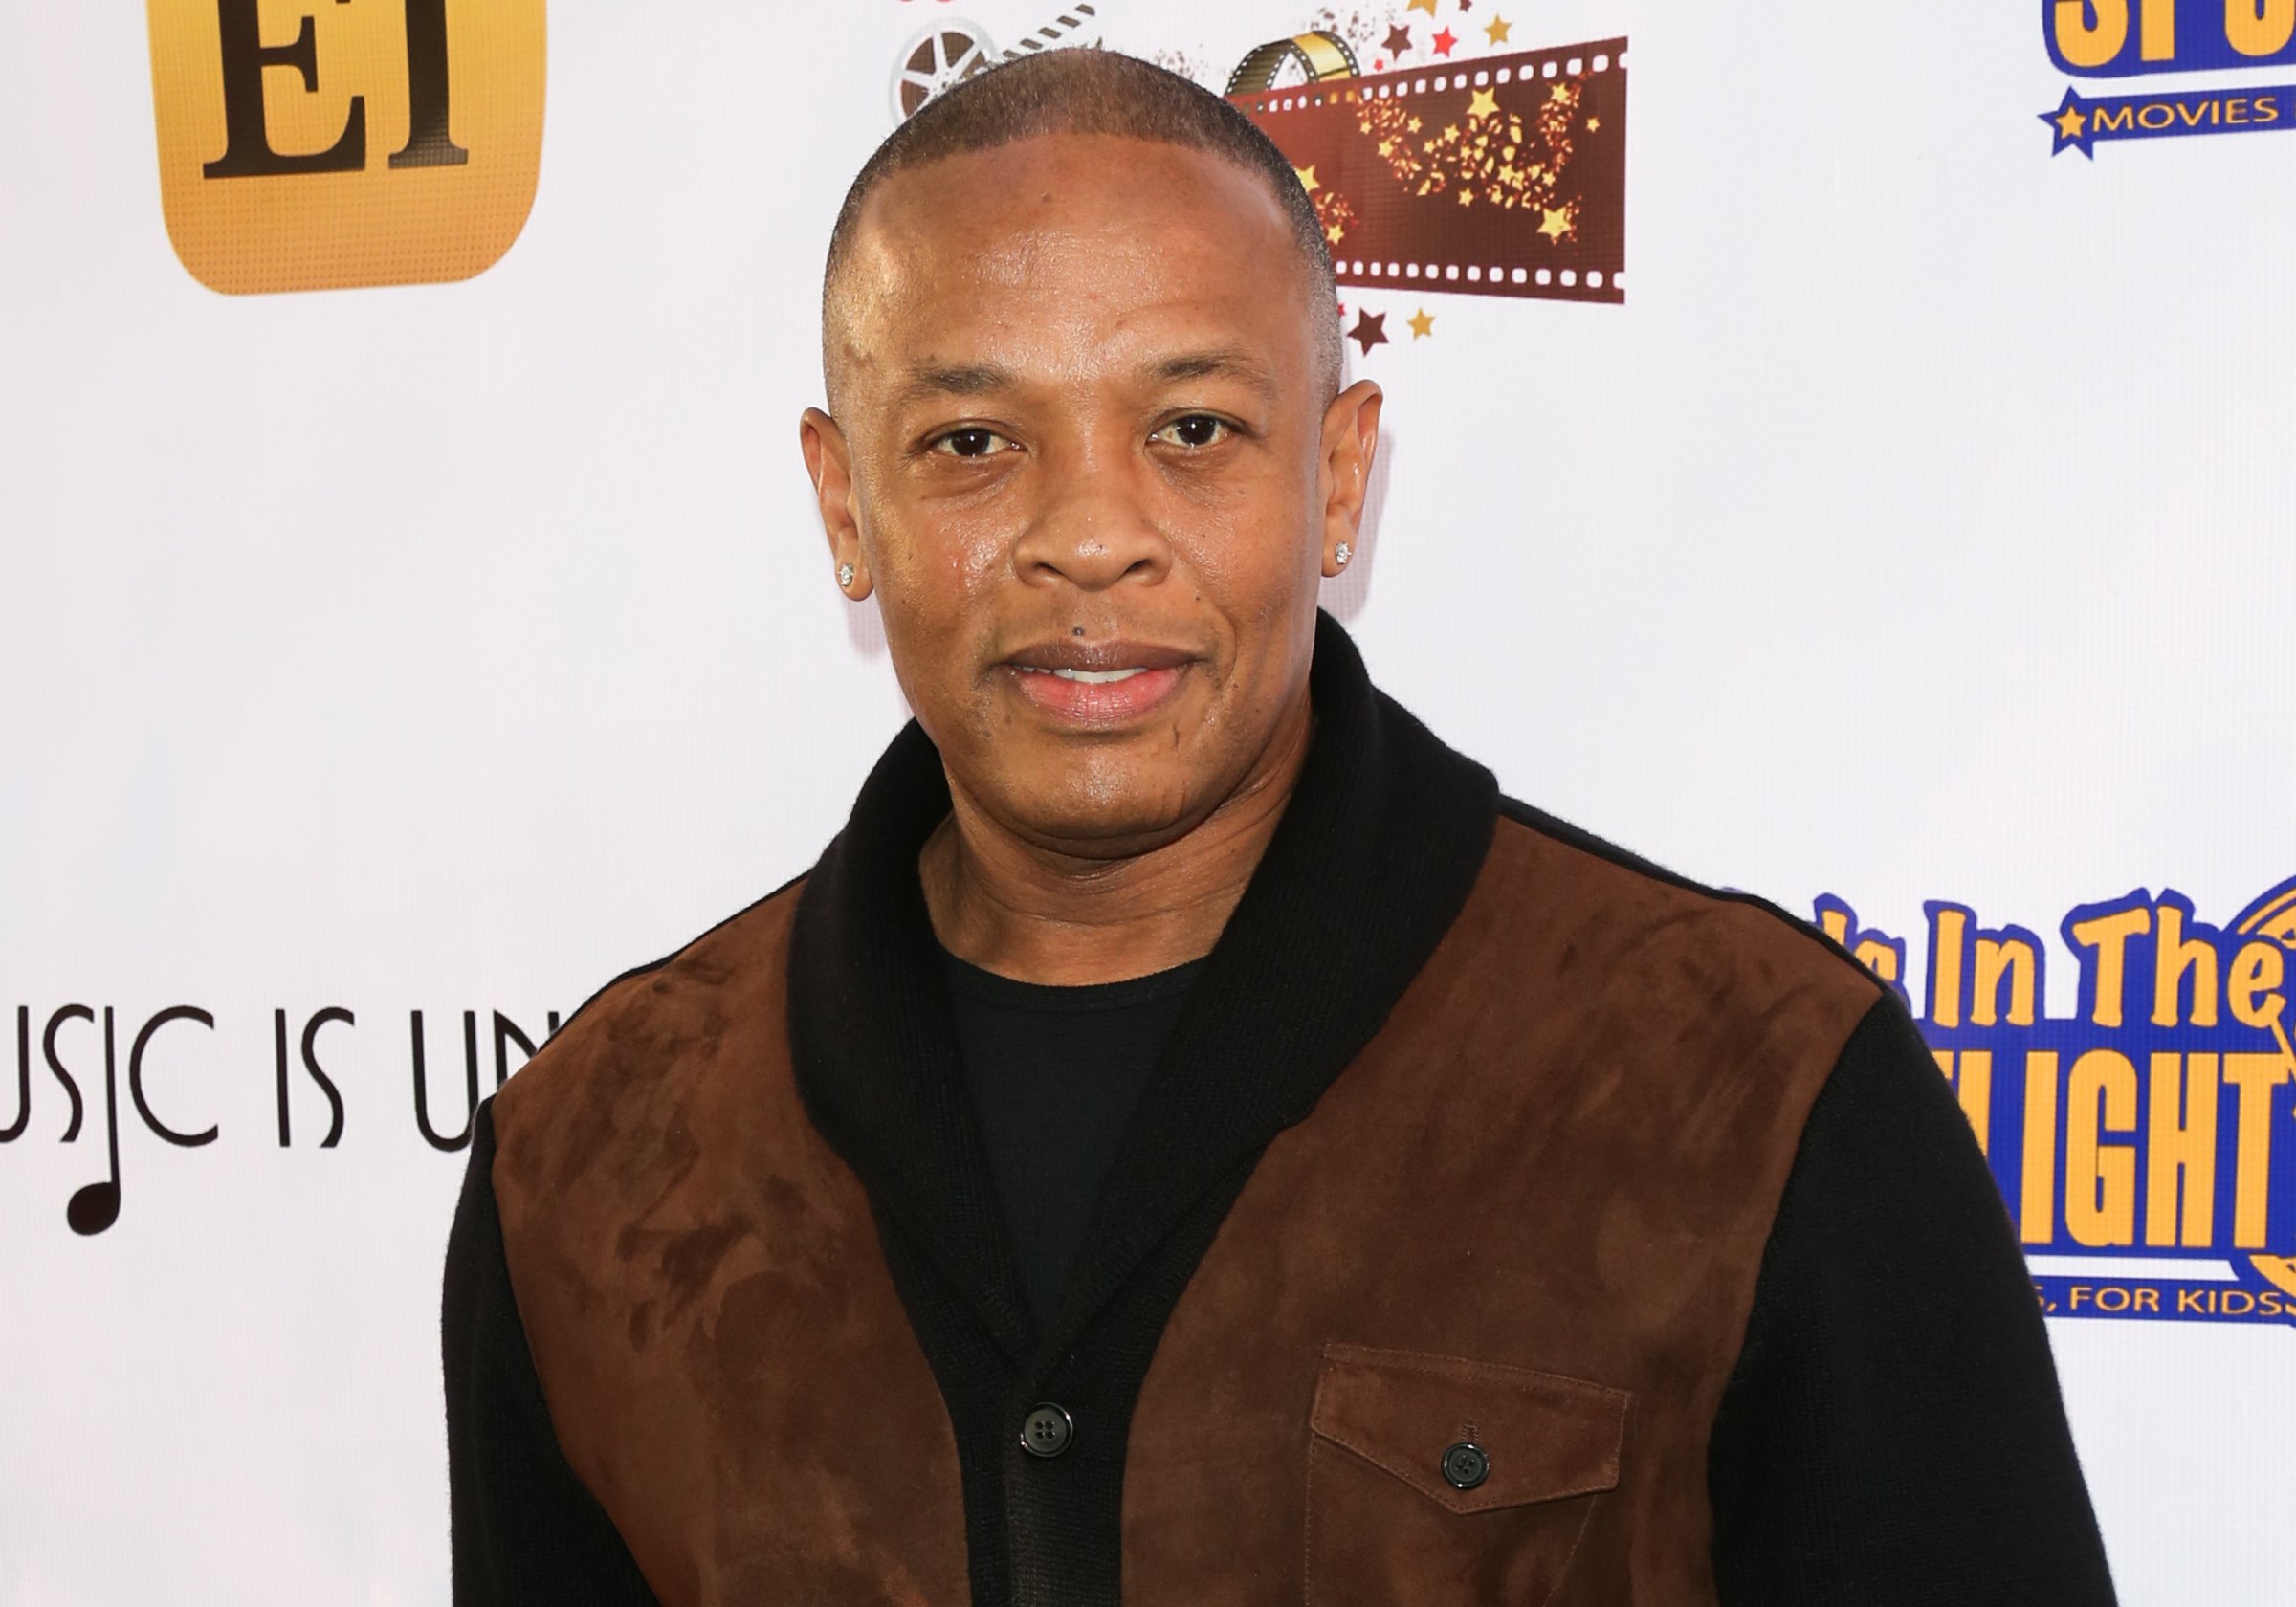 Rapper / Producer Dr. Dre attends the Kids In The Spotlight's Movies By Kids, For Kids Film Awards at Fox Studios on November 7, 2015 in Los Angeles, California.